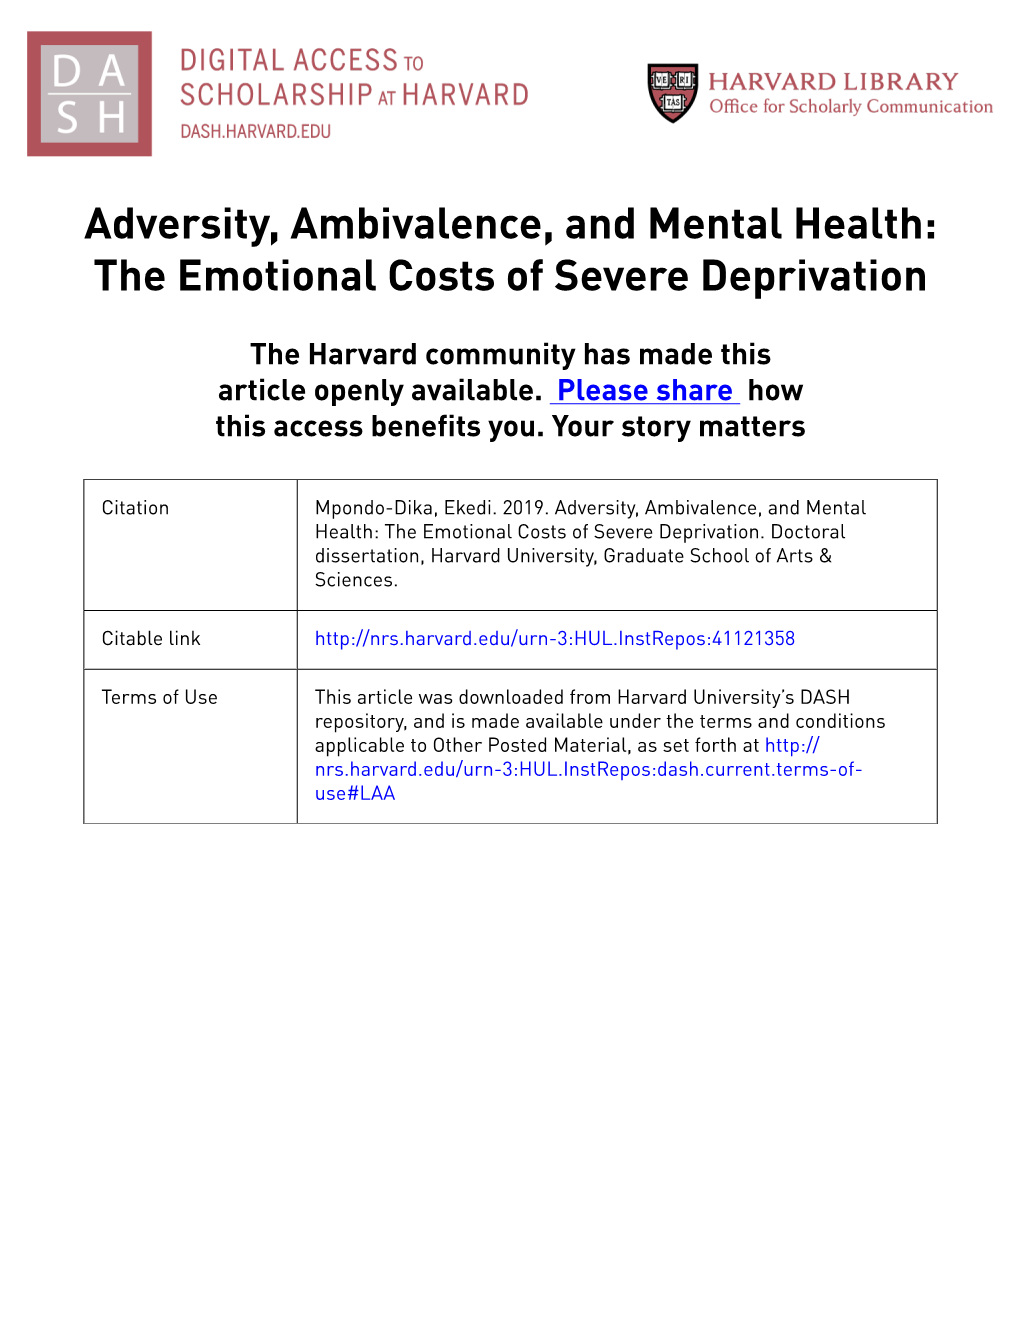 Adversity, Ambivalence, and Mental Health: the Emotional Costs of Severe Deprivation